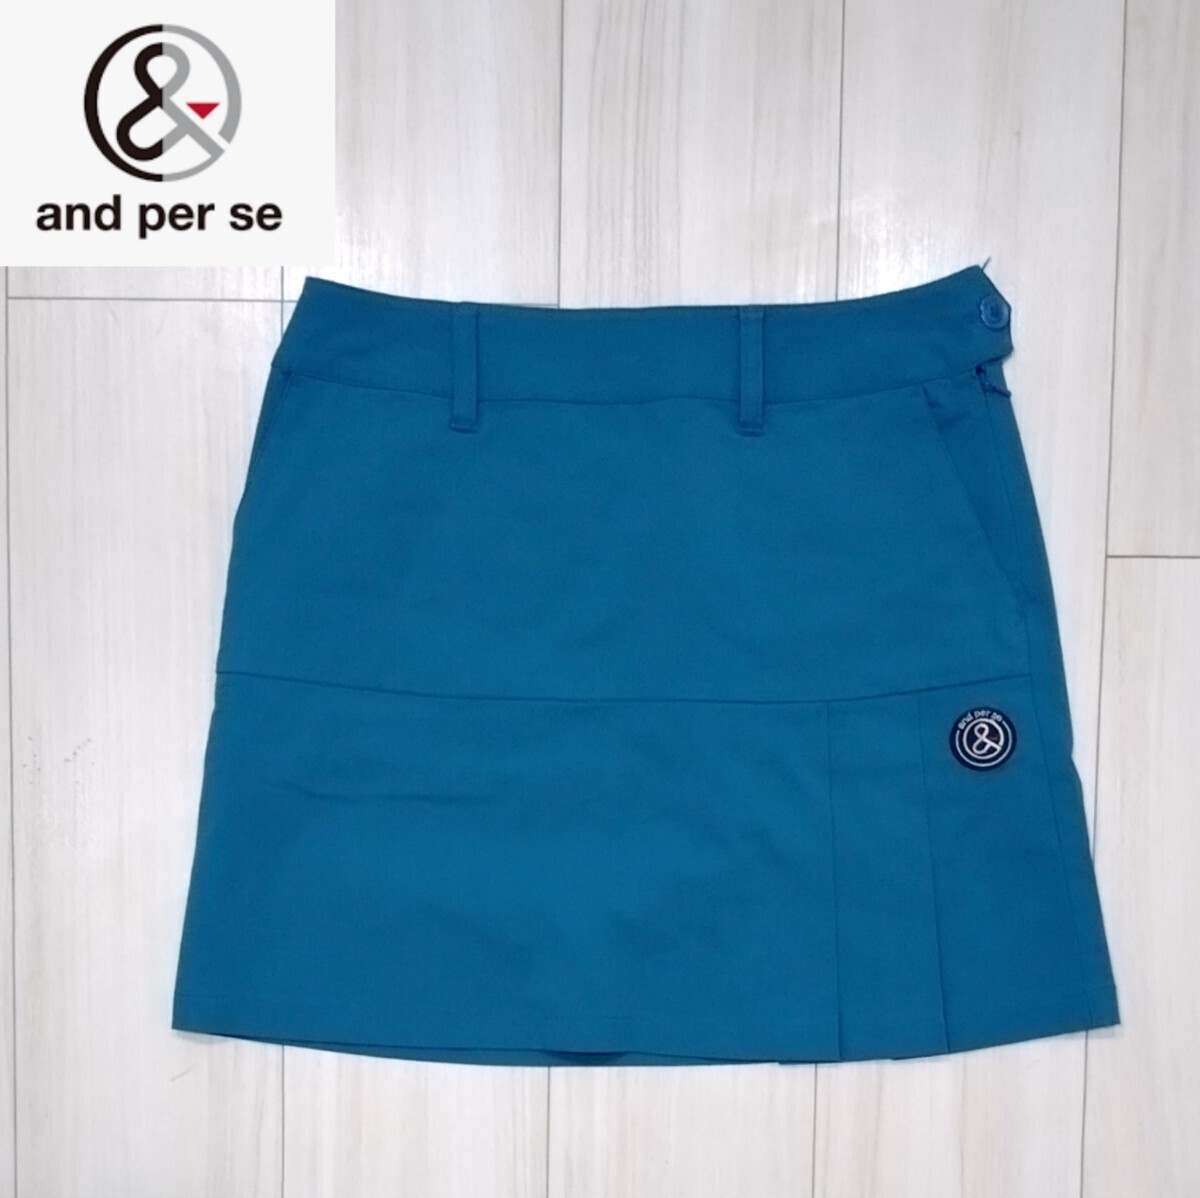  beautiful goods and per se skirt M lady's stretch short pants Anne Pas . Golf black and white 